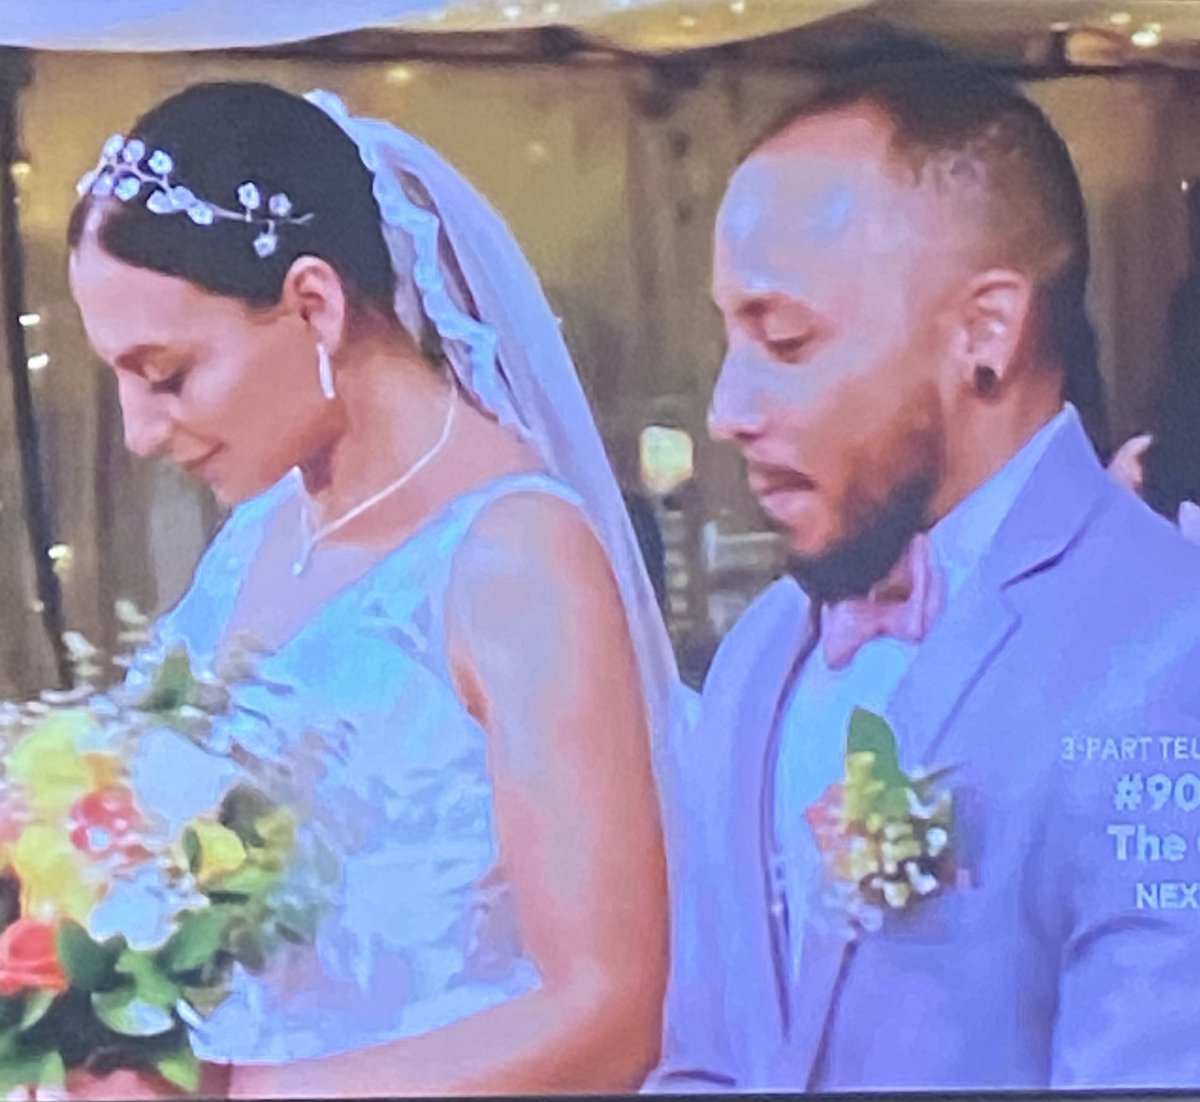 I think Monica will 100% regret missing this wedding. I also think she really thought Gabe wouldn’t go through with it without her. Check your narcissism Monica. #90DayFiance #90DaysFiance #90daytheotherway #90dayfiancetheotherway